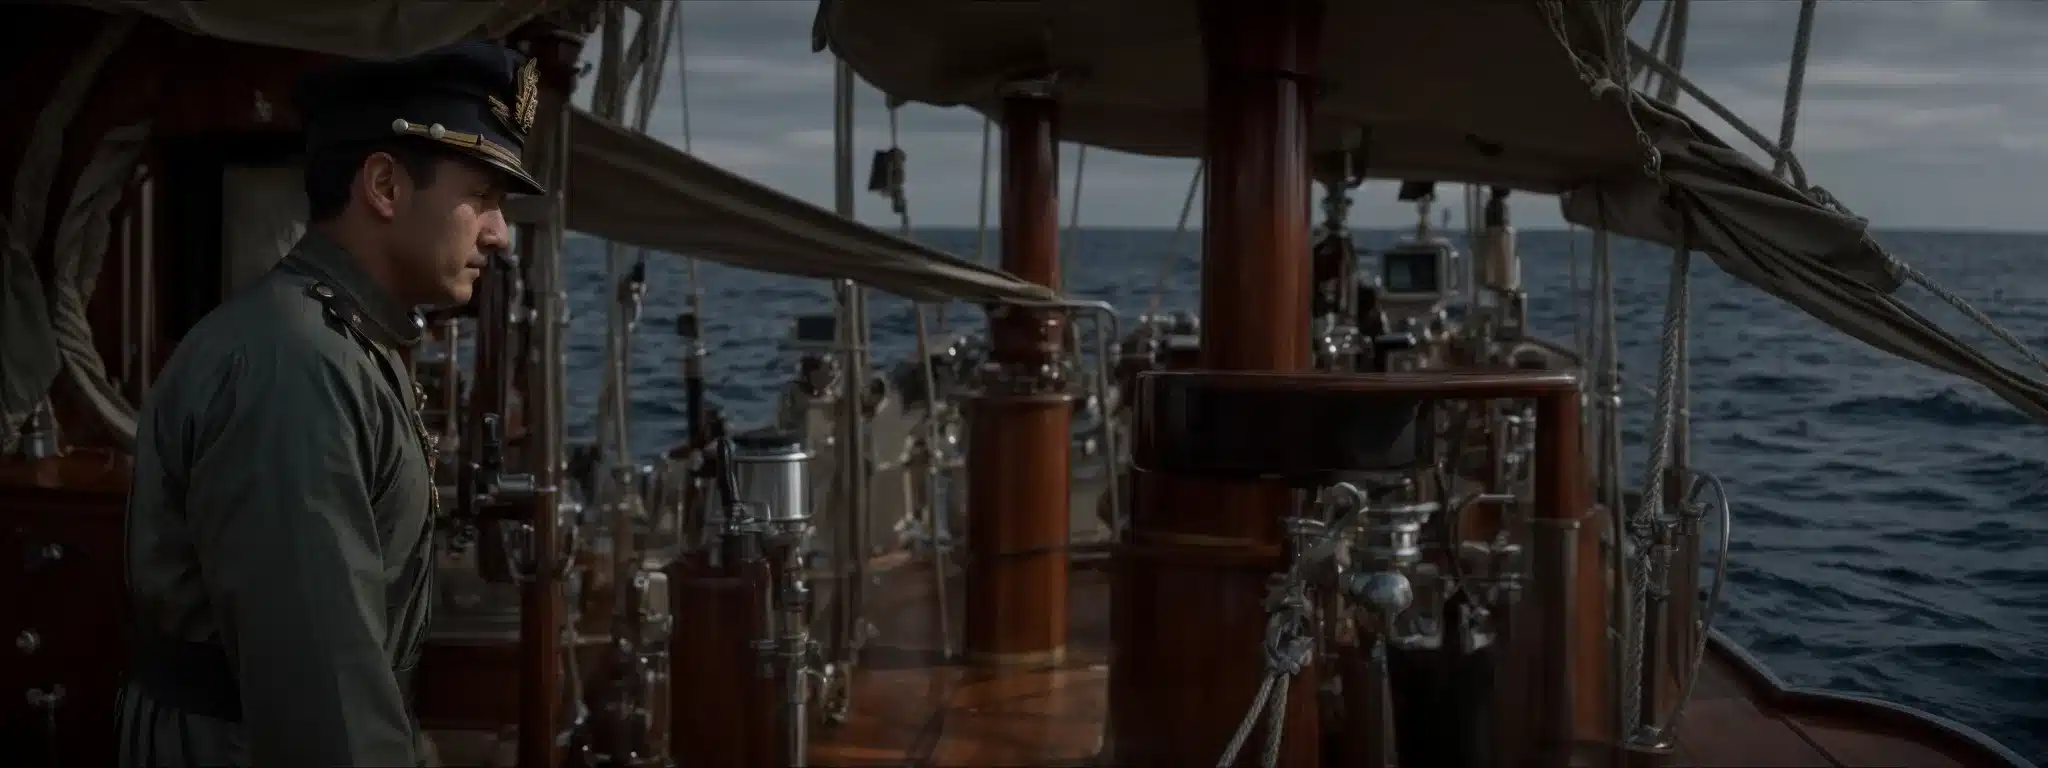 A Lone Captain Stands At The Helm Of A Grand Ship, Peering Through A Spyglass Across The Open Sea.